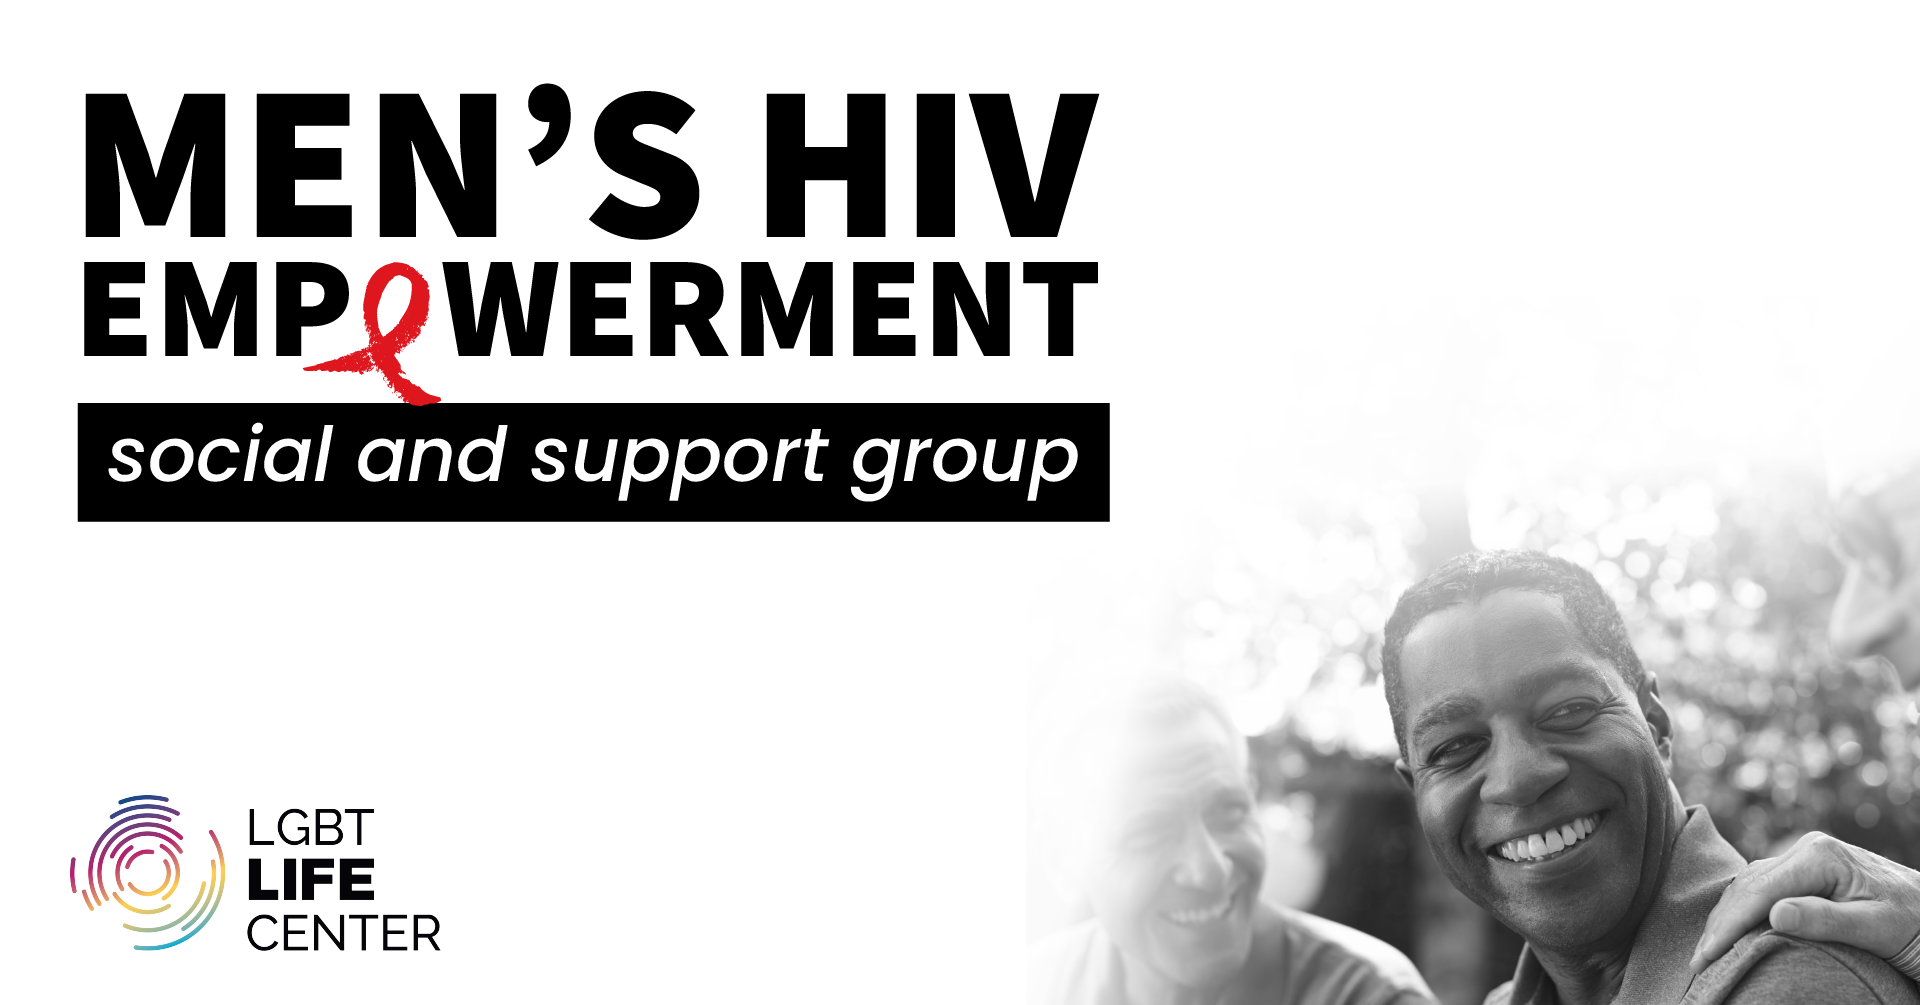 Men's HIV Empowerment social and support group